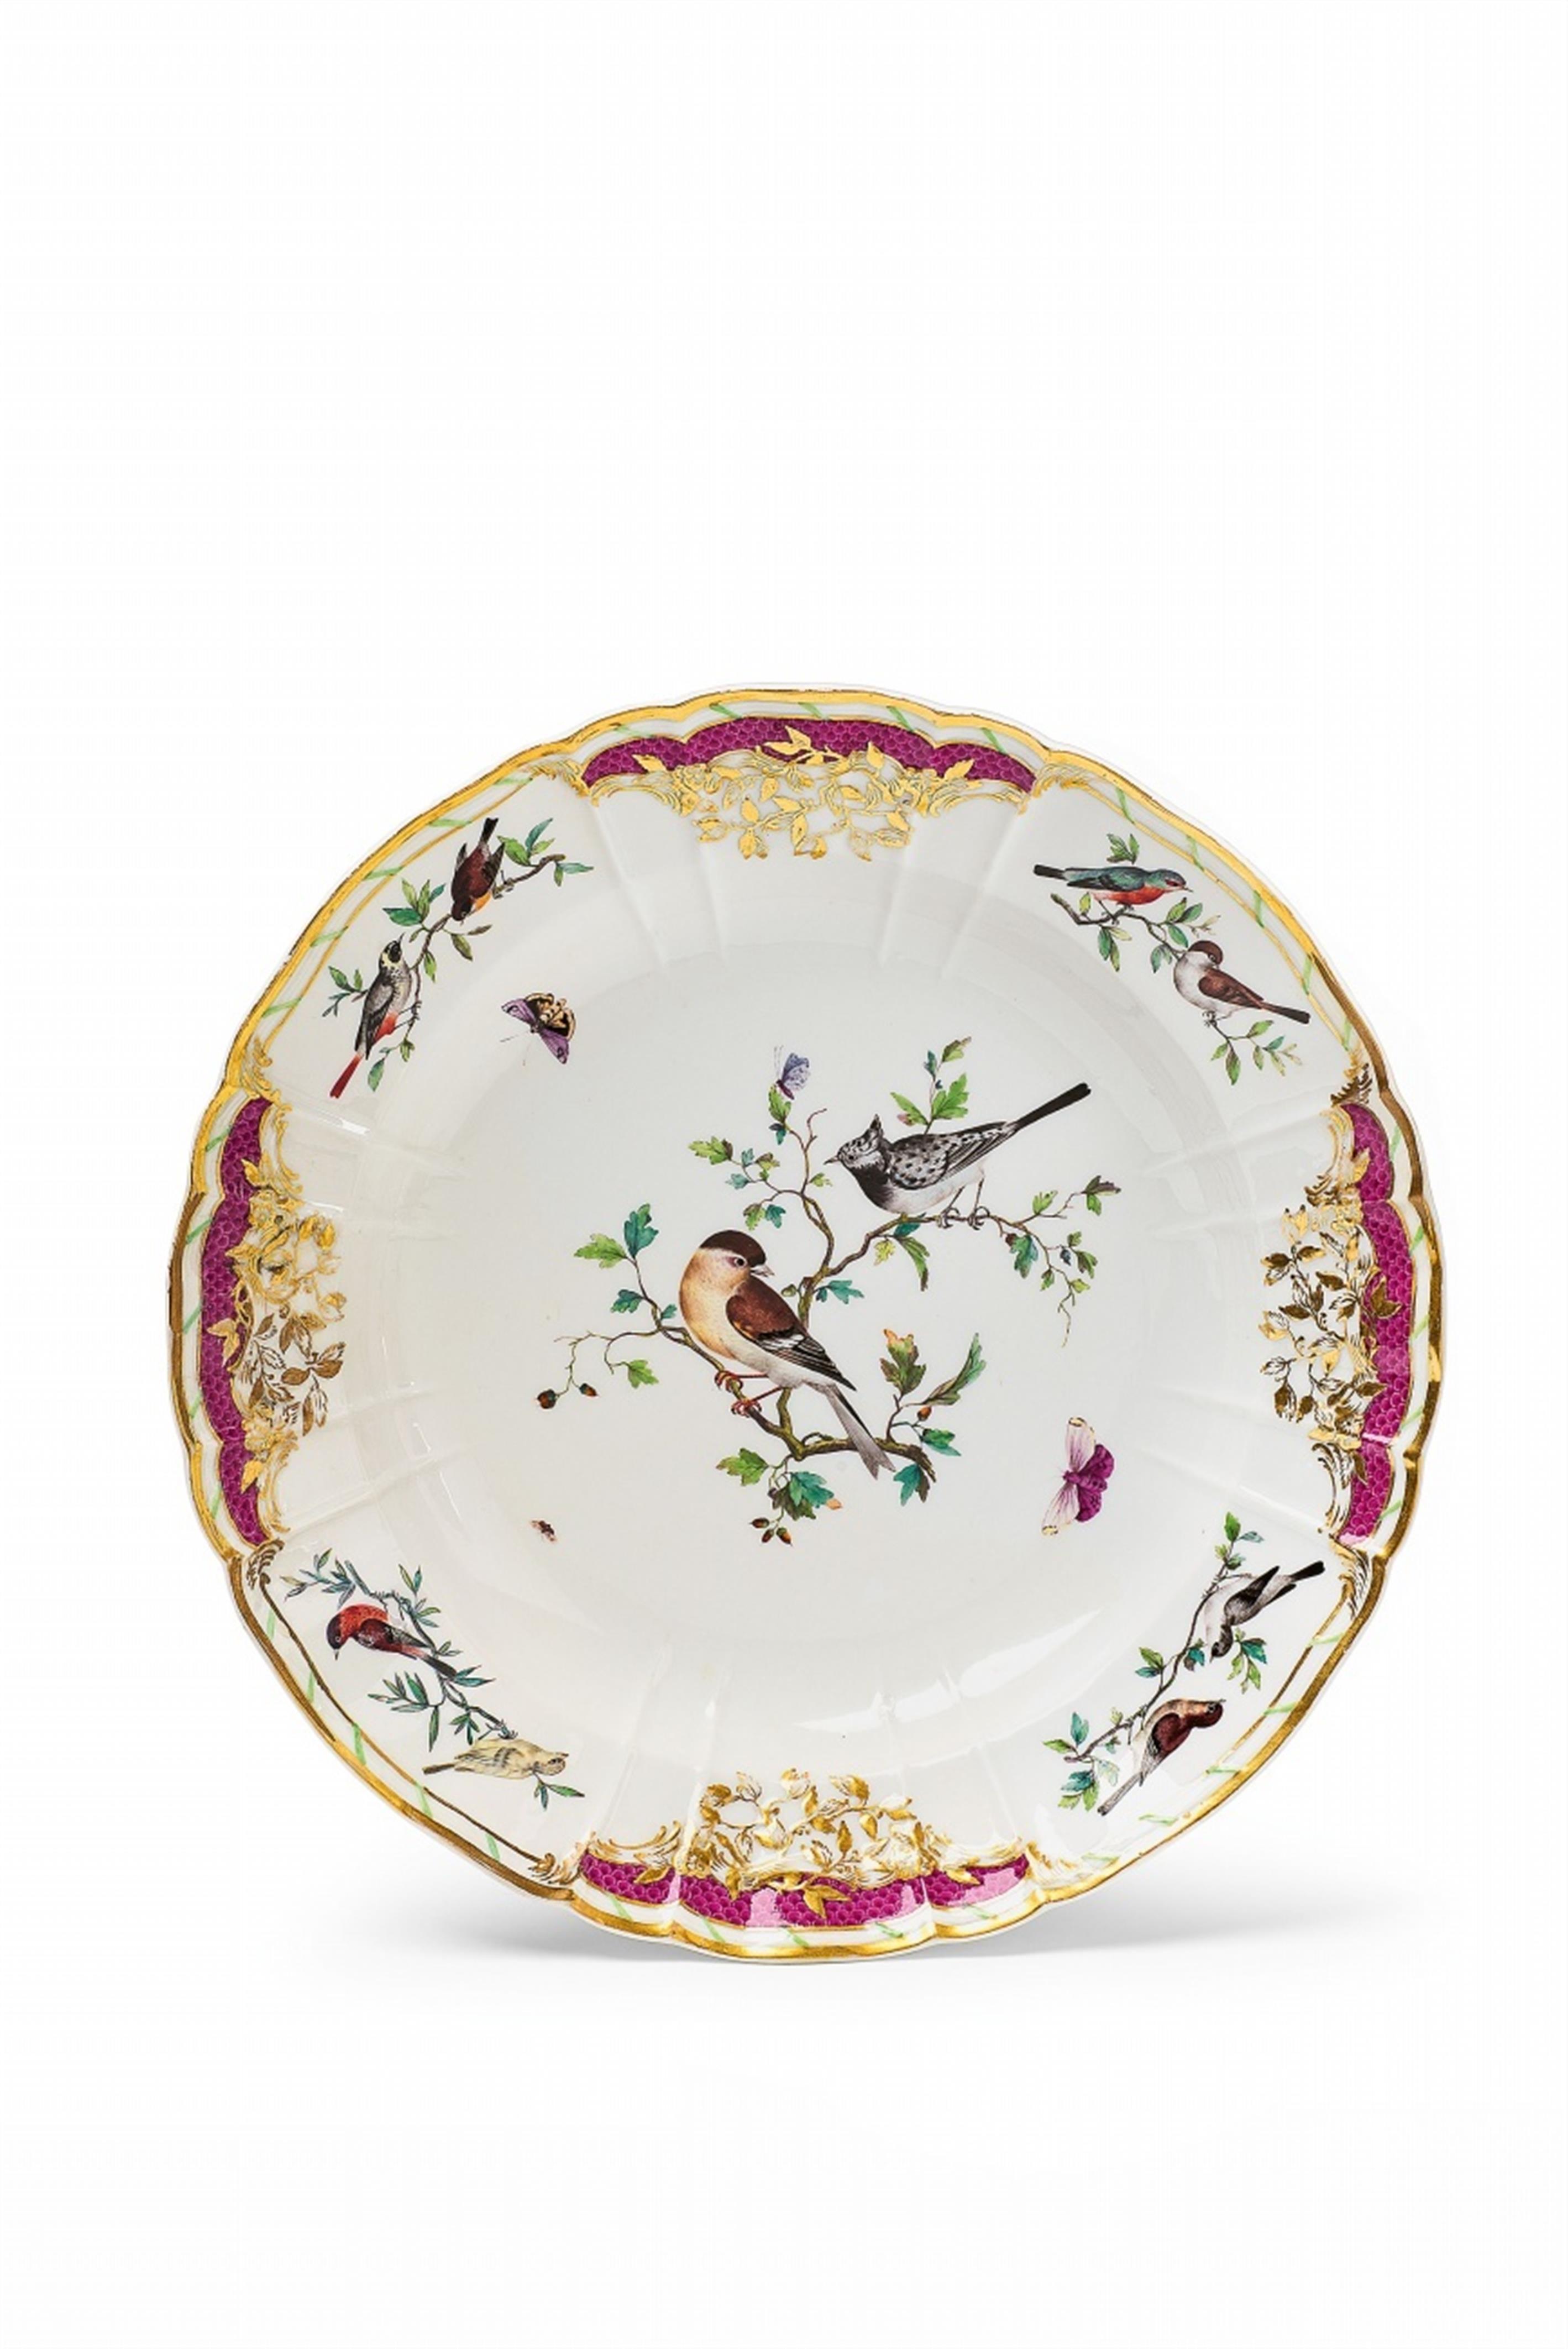 A round Berlin KPM porcelain platter from the service for Duke Rothenburg - image-1